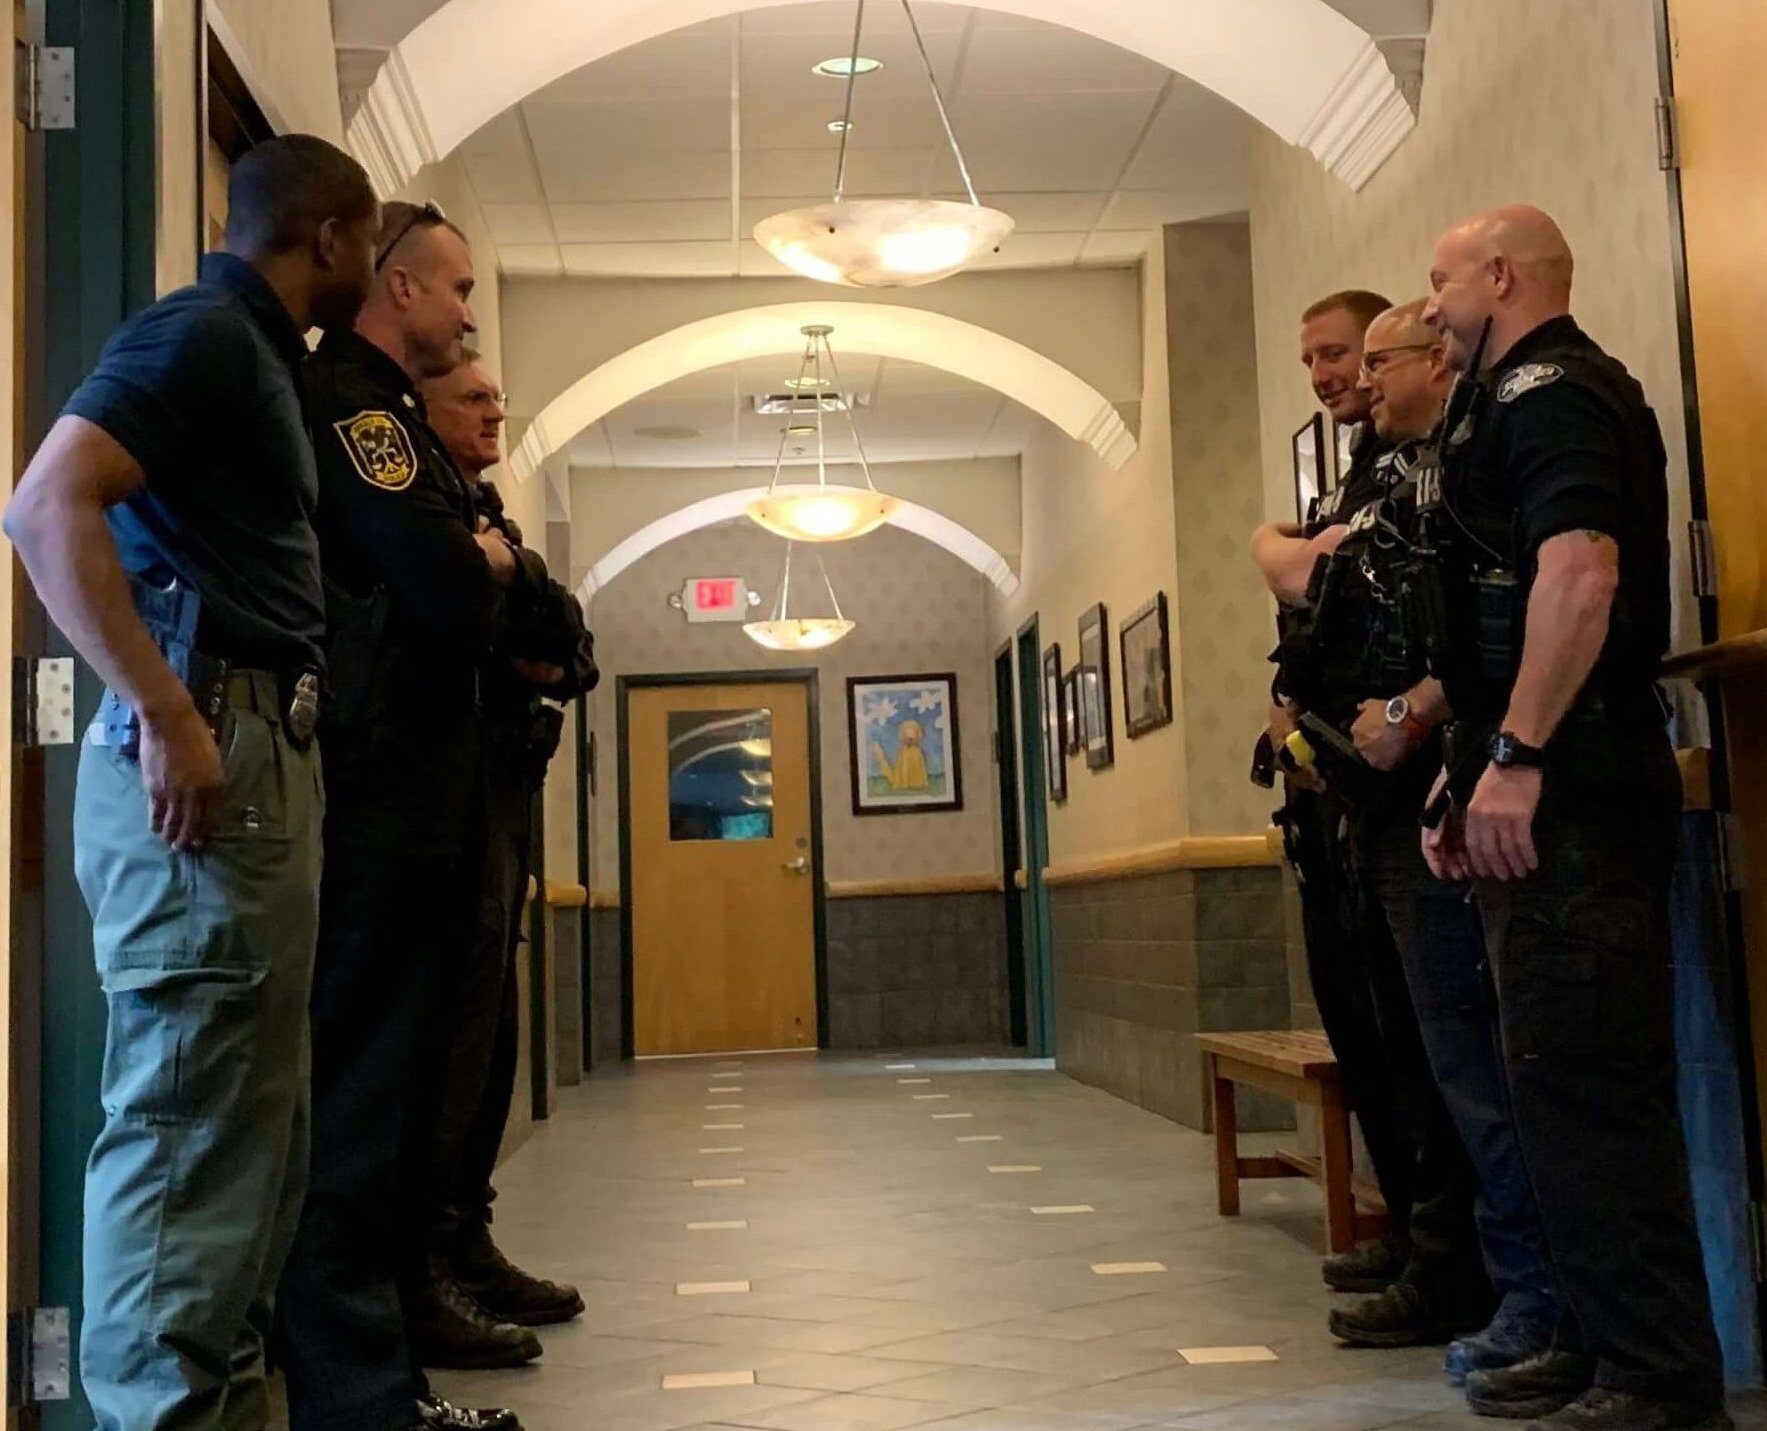 Officers wait in hallway of hospital.